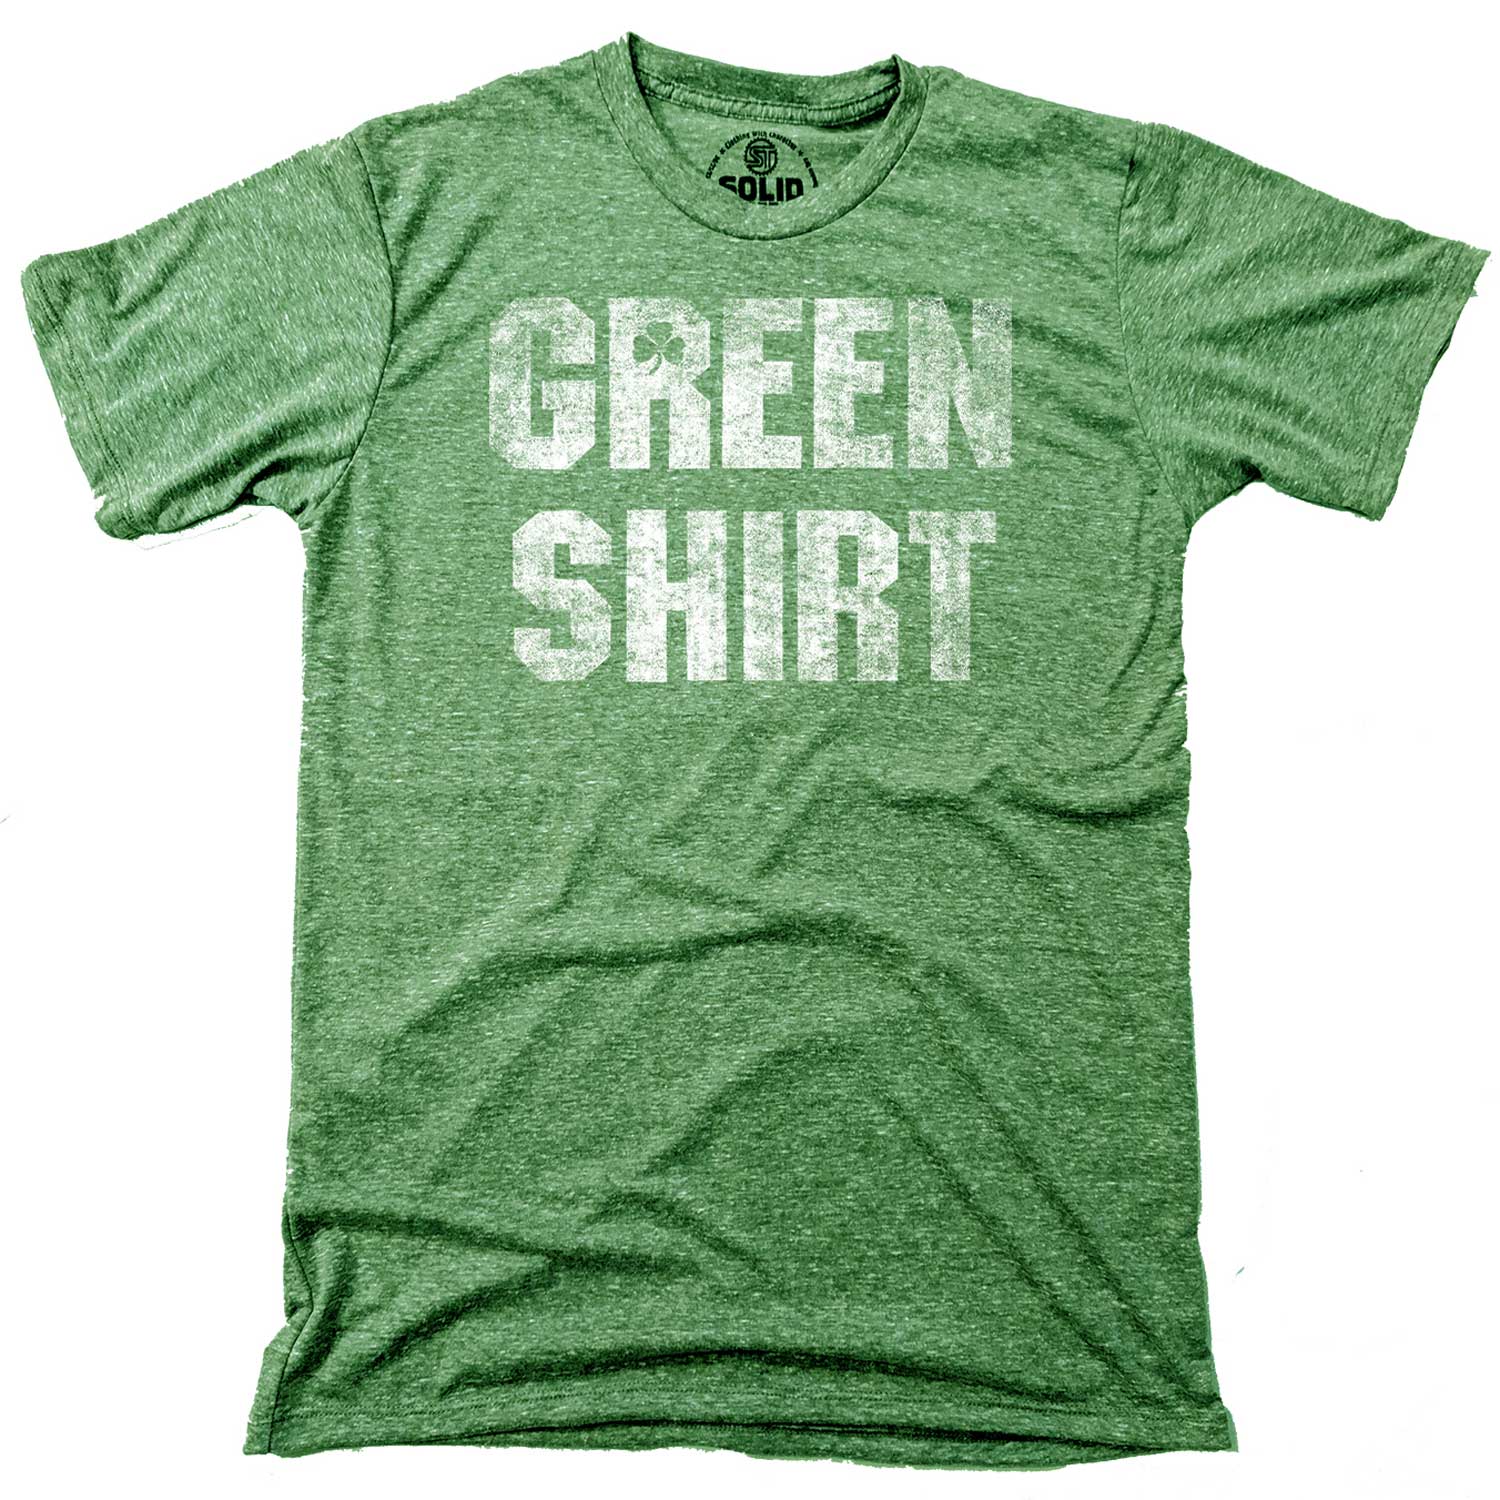 Men's Green Shirt Cool Graphic T-Shirt | Vintage St Paddys Day Soft Tee | Solid Threads